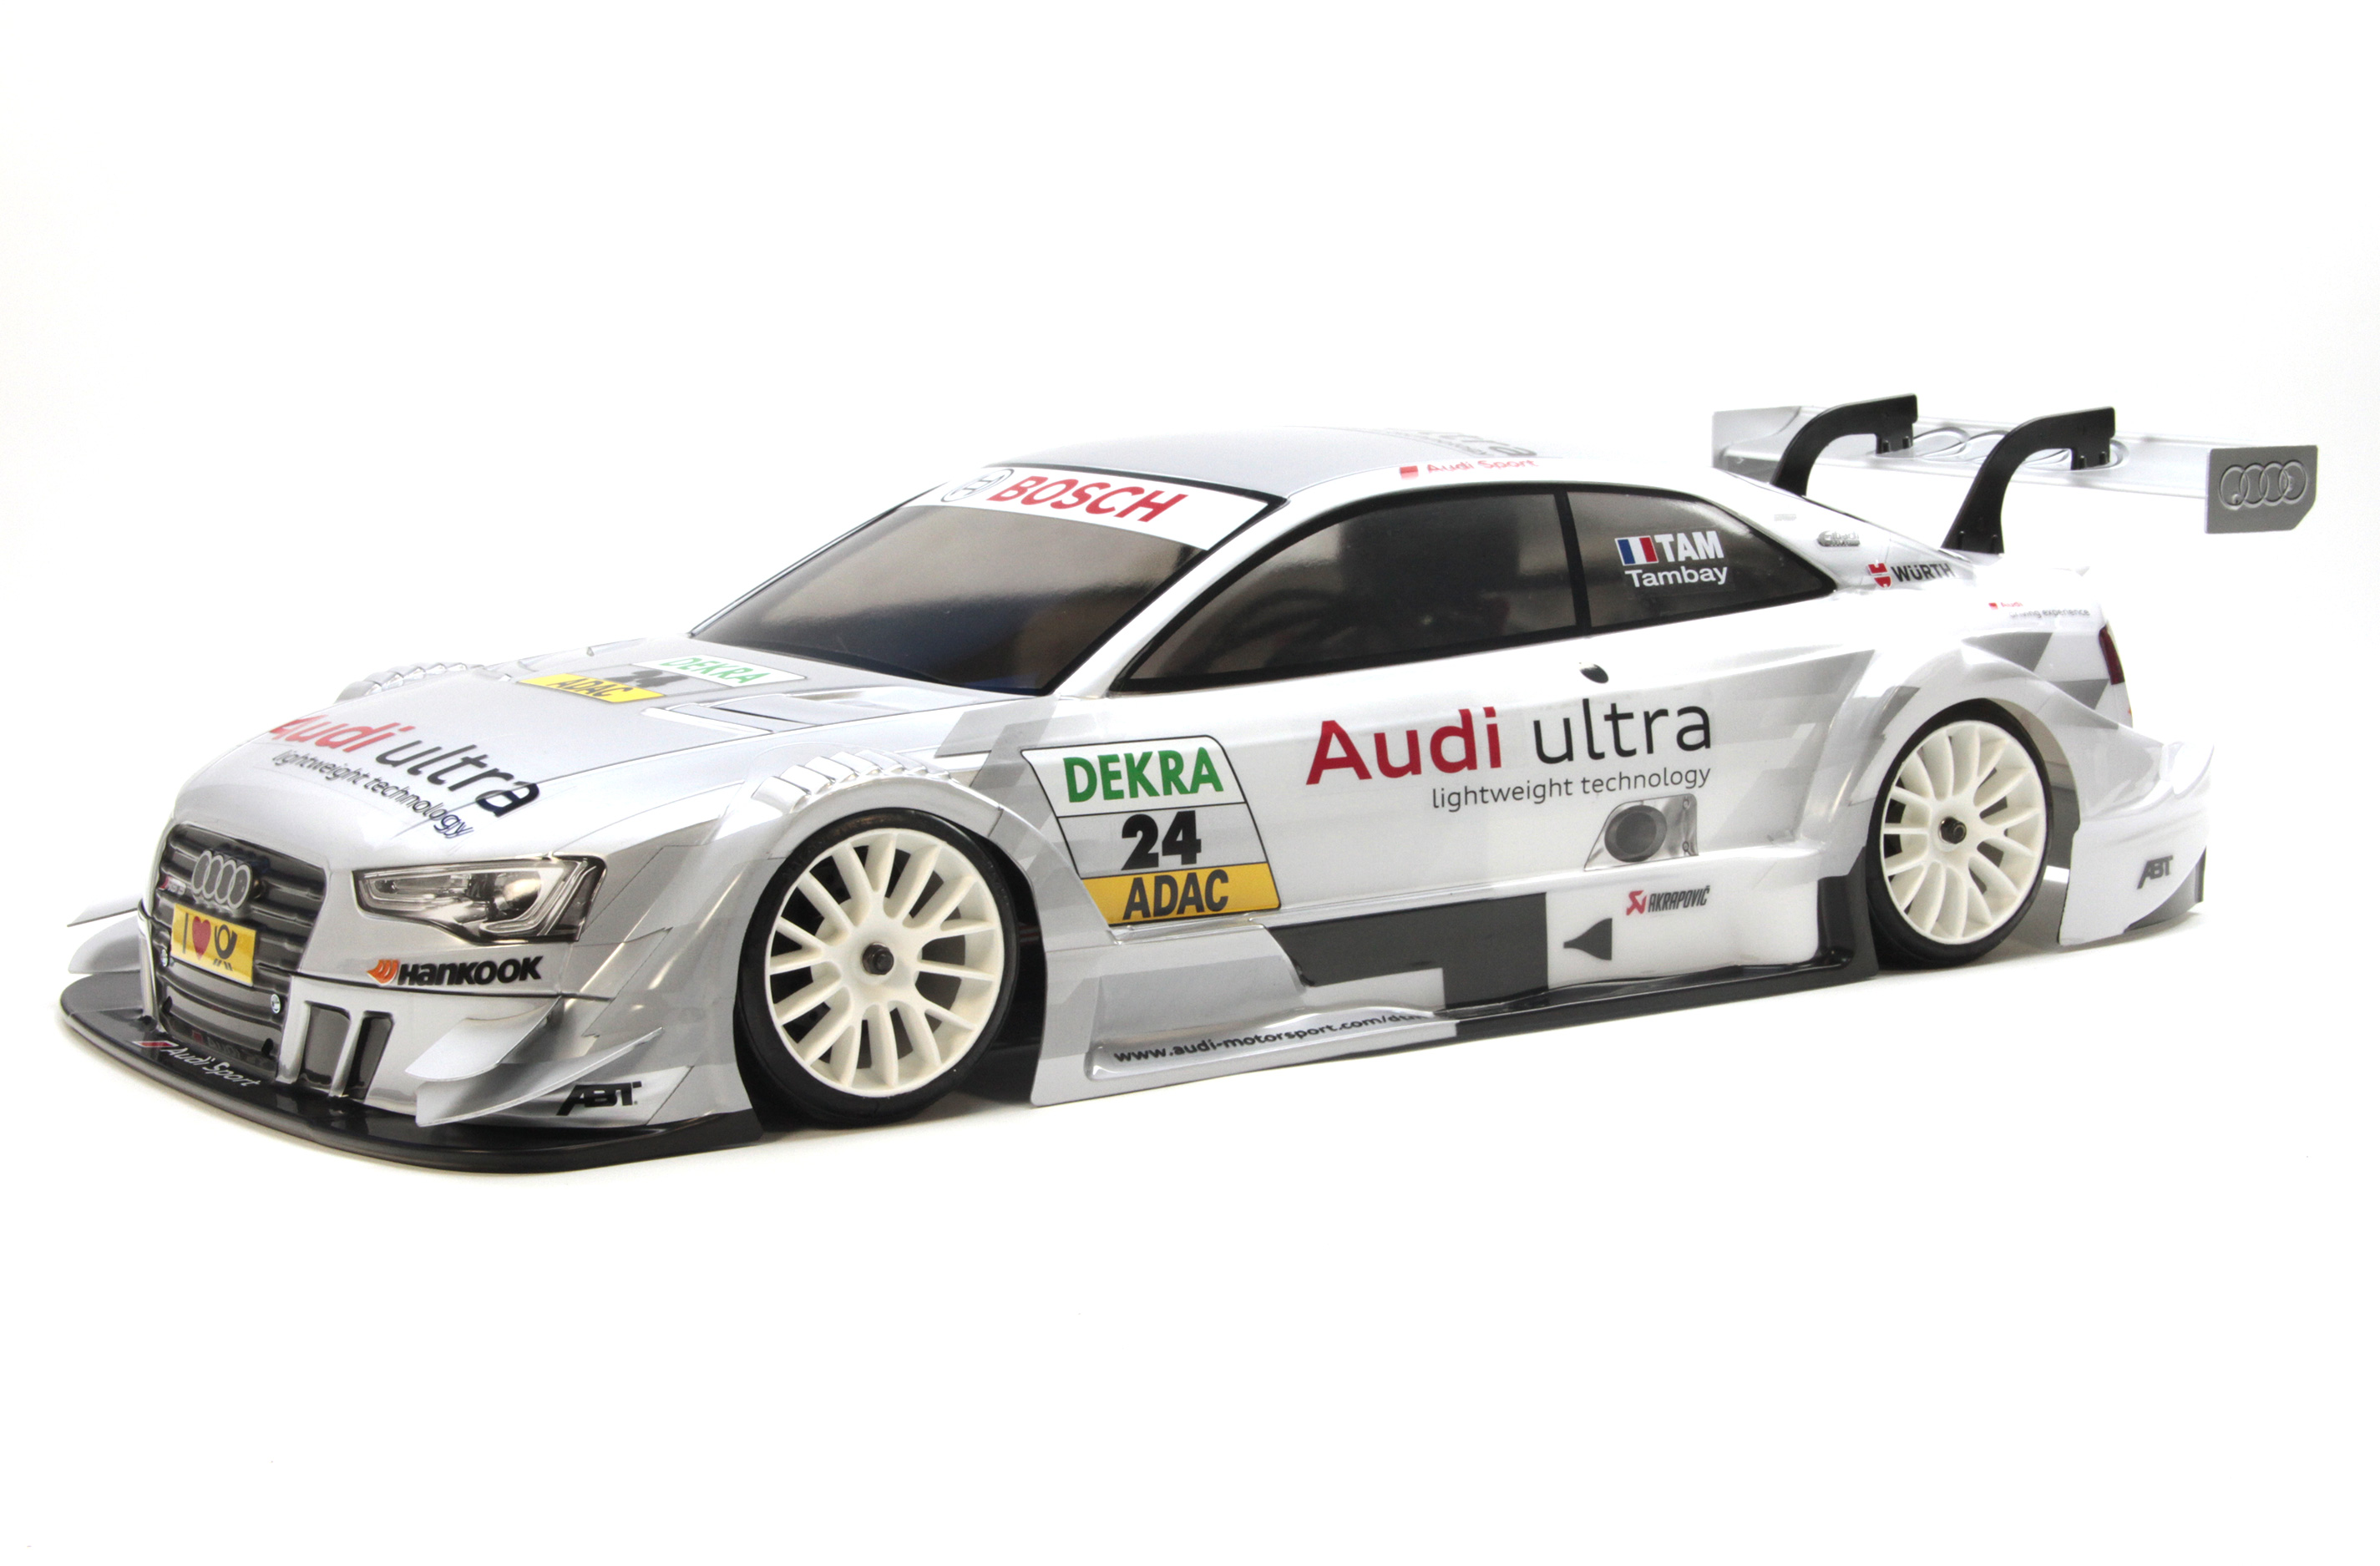 FG Raceline with Audi RS5 body shell